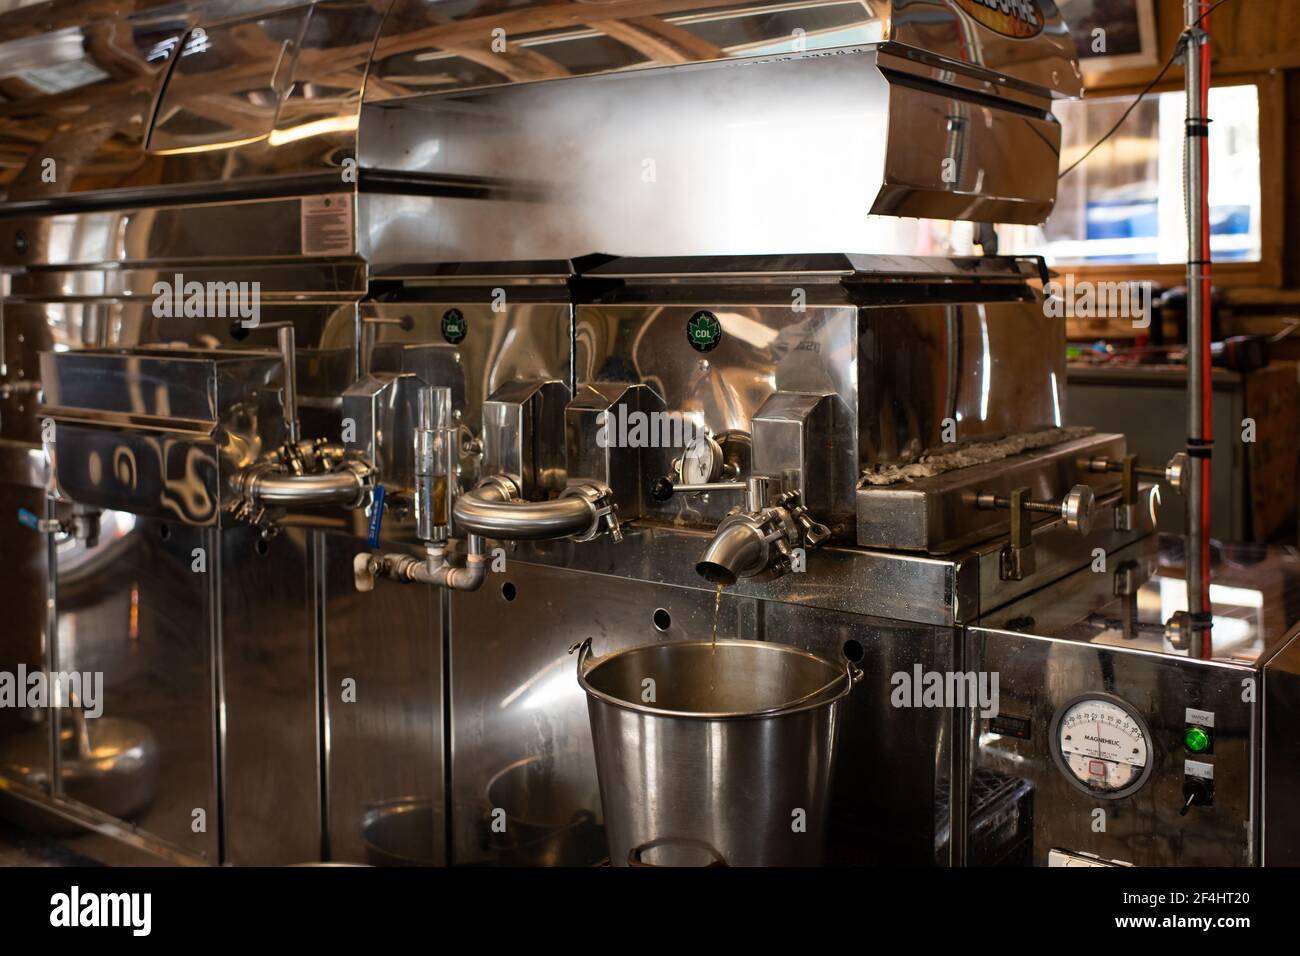 A maple syrup evaporator plant in operation at the McComb's Oak Hill Farm in Speculator, NY in the Adirondack Mountains with rising steam. Stock Photo